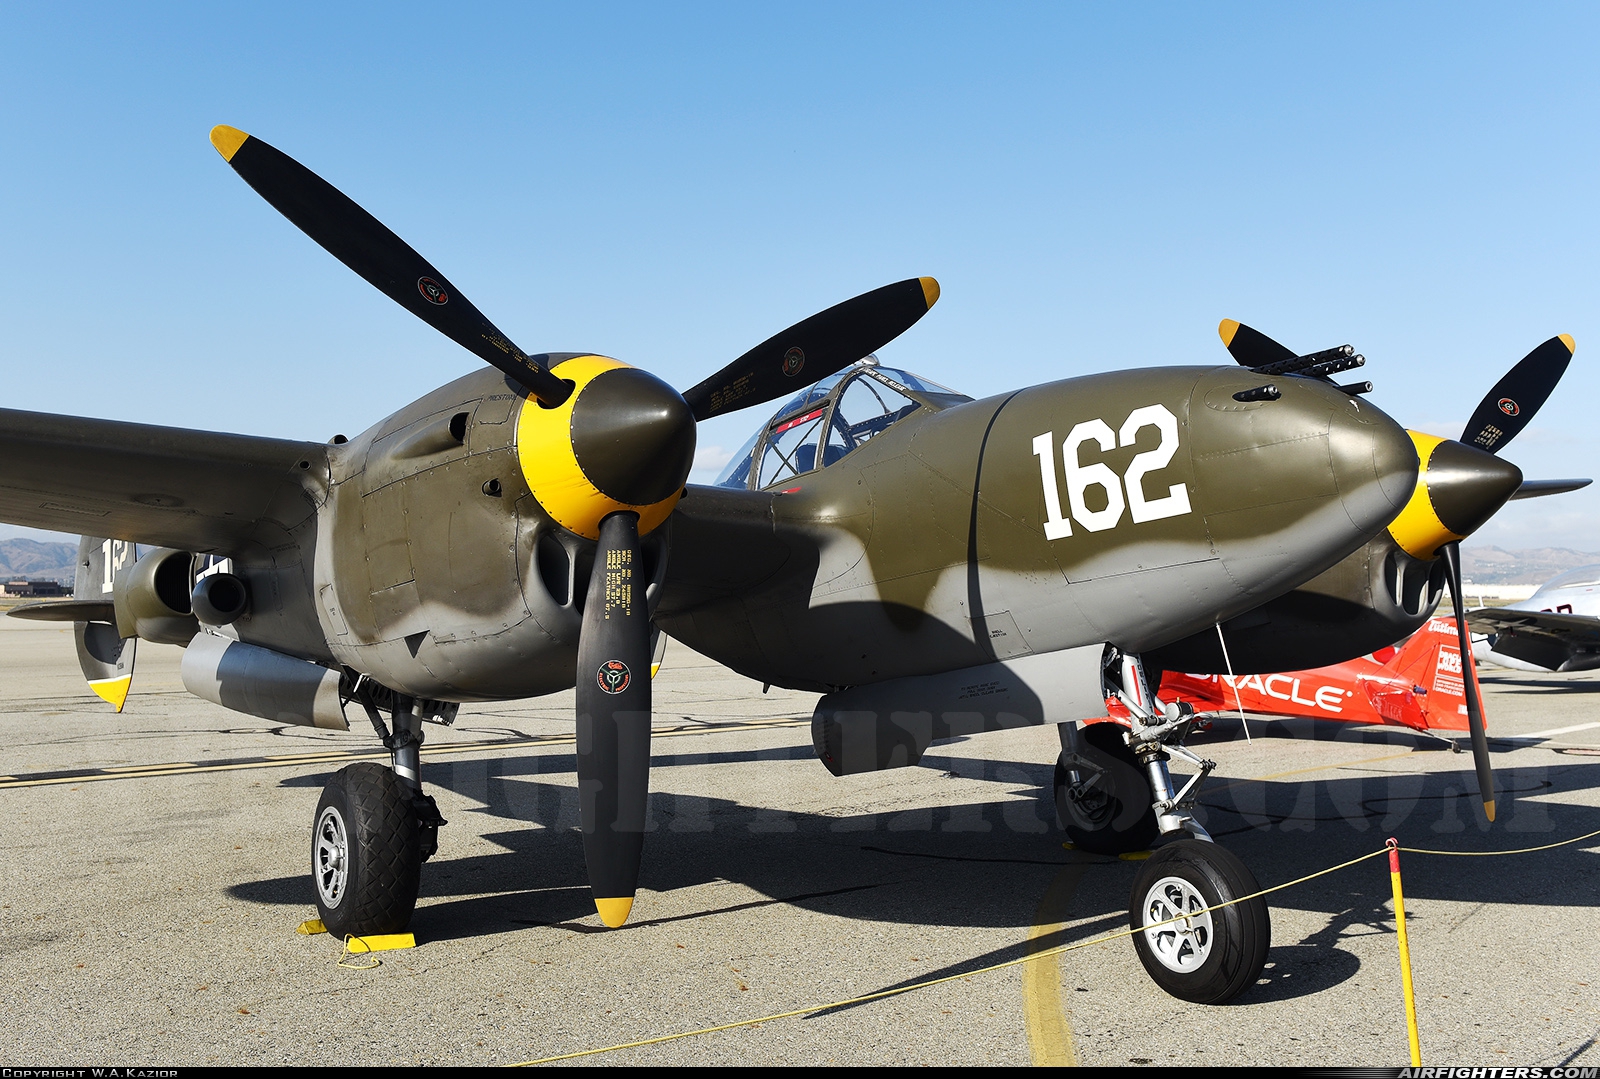 Private - Planes of Fame Air Museum Lockheed P-38J Lightning N138AM at Chino (CNO), USA